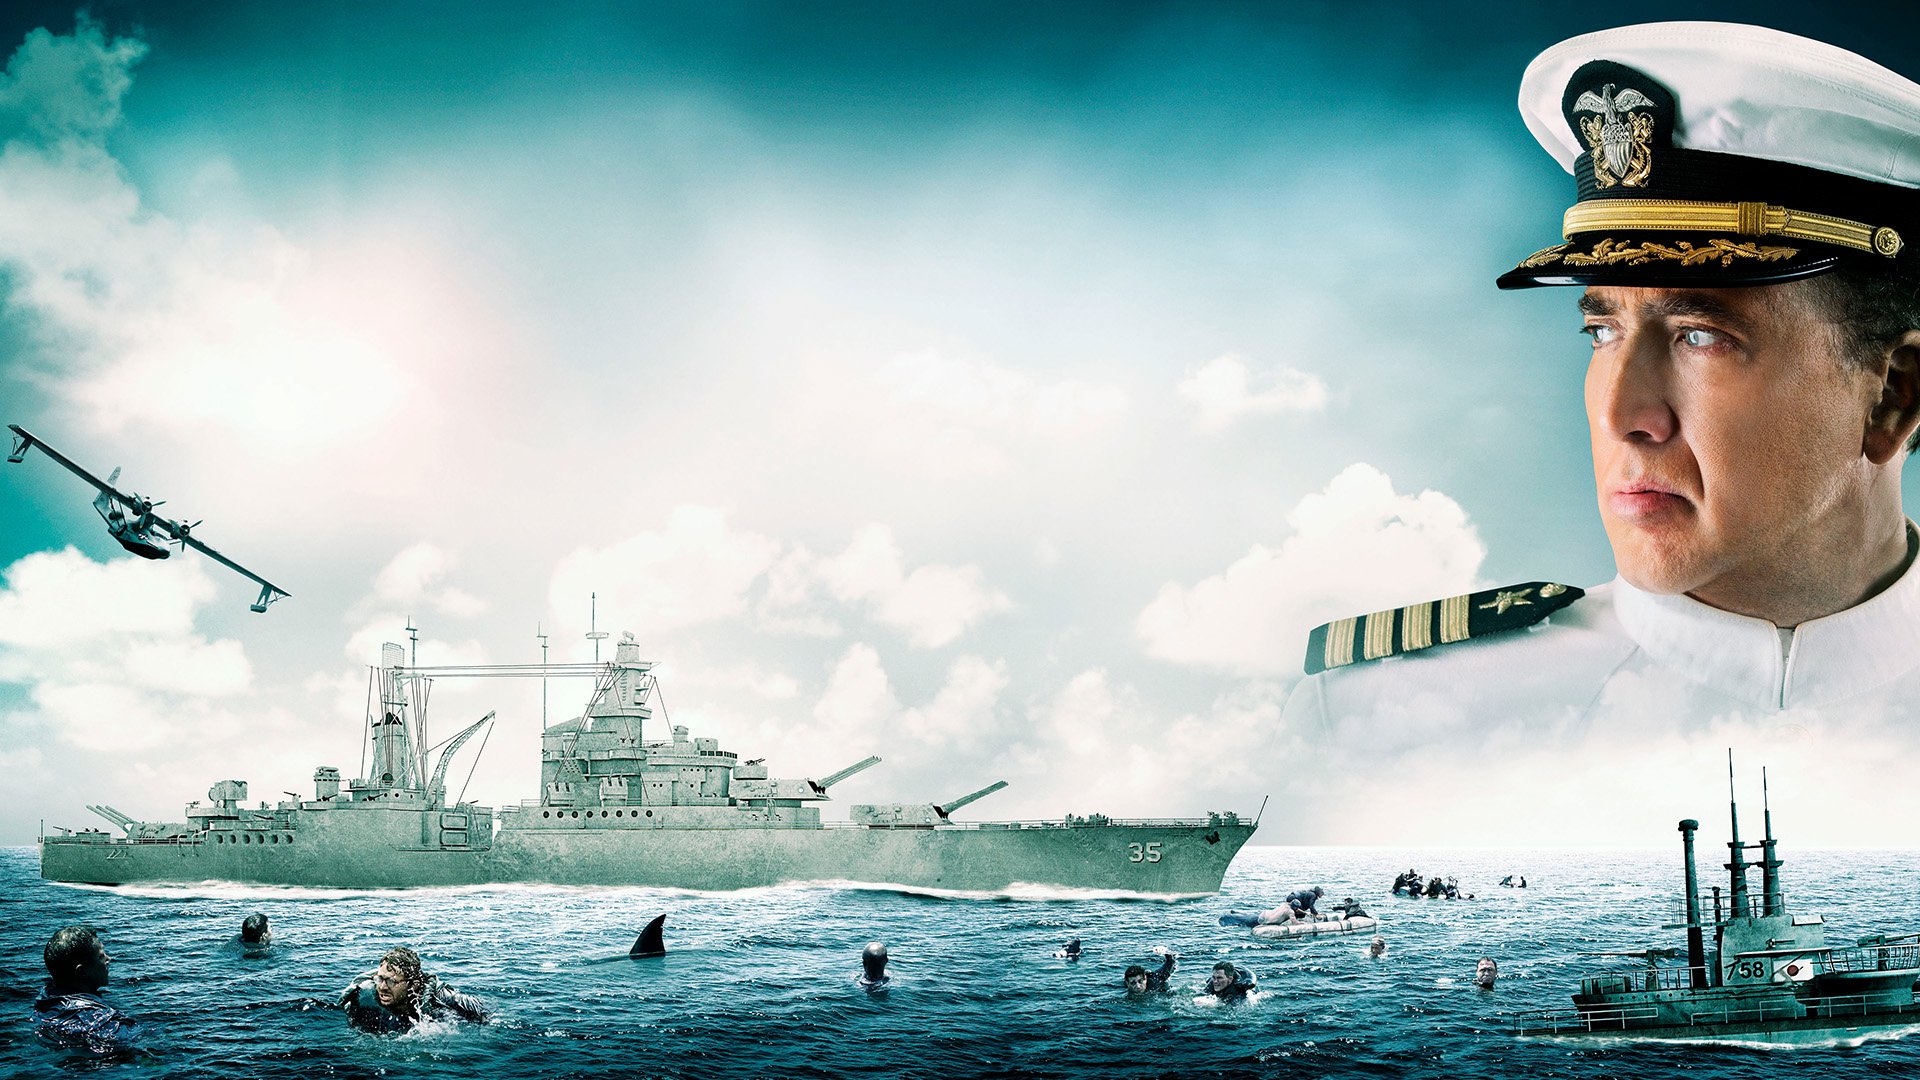 Uss Indianapolis Men Of Courage HD Wallpaper Background Image